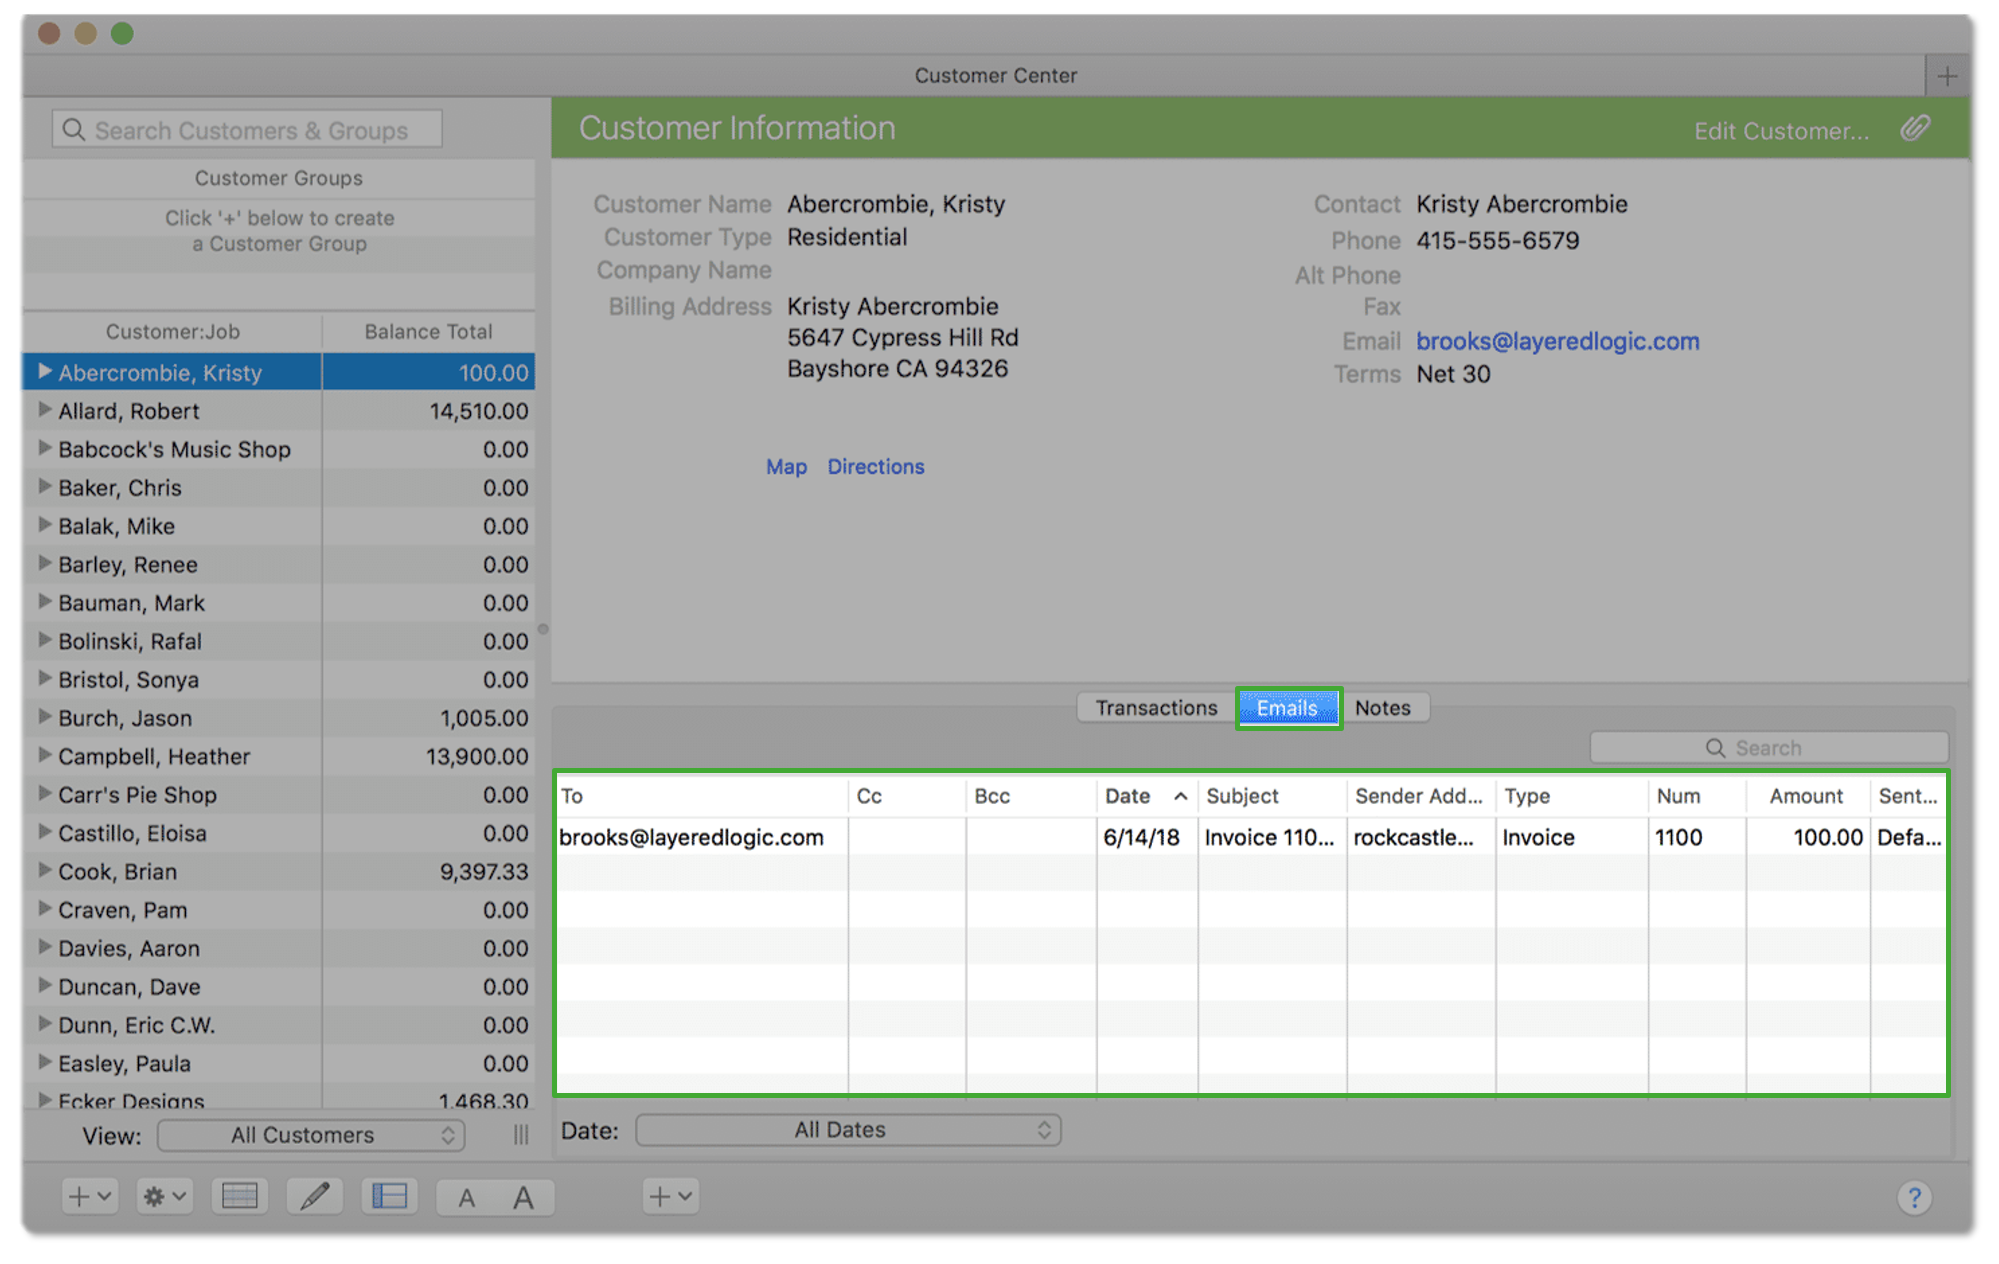 quickbooks for mac 2016 download link